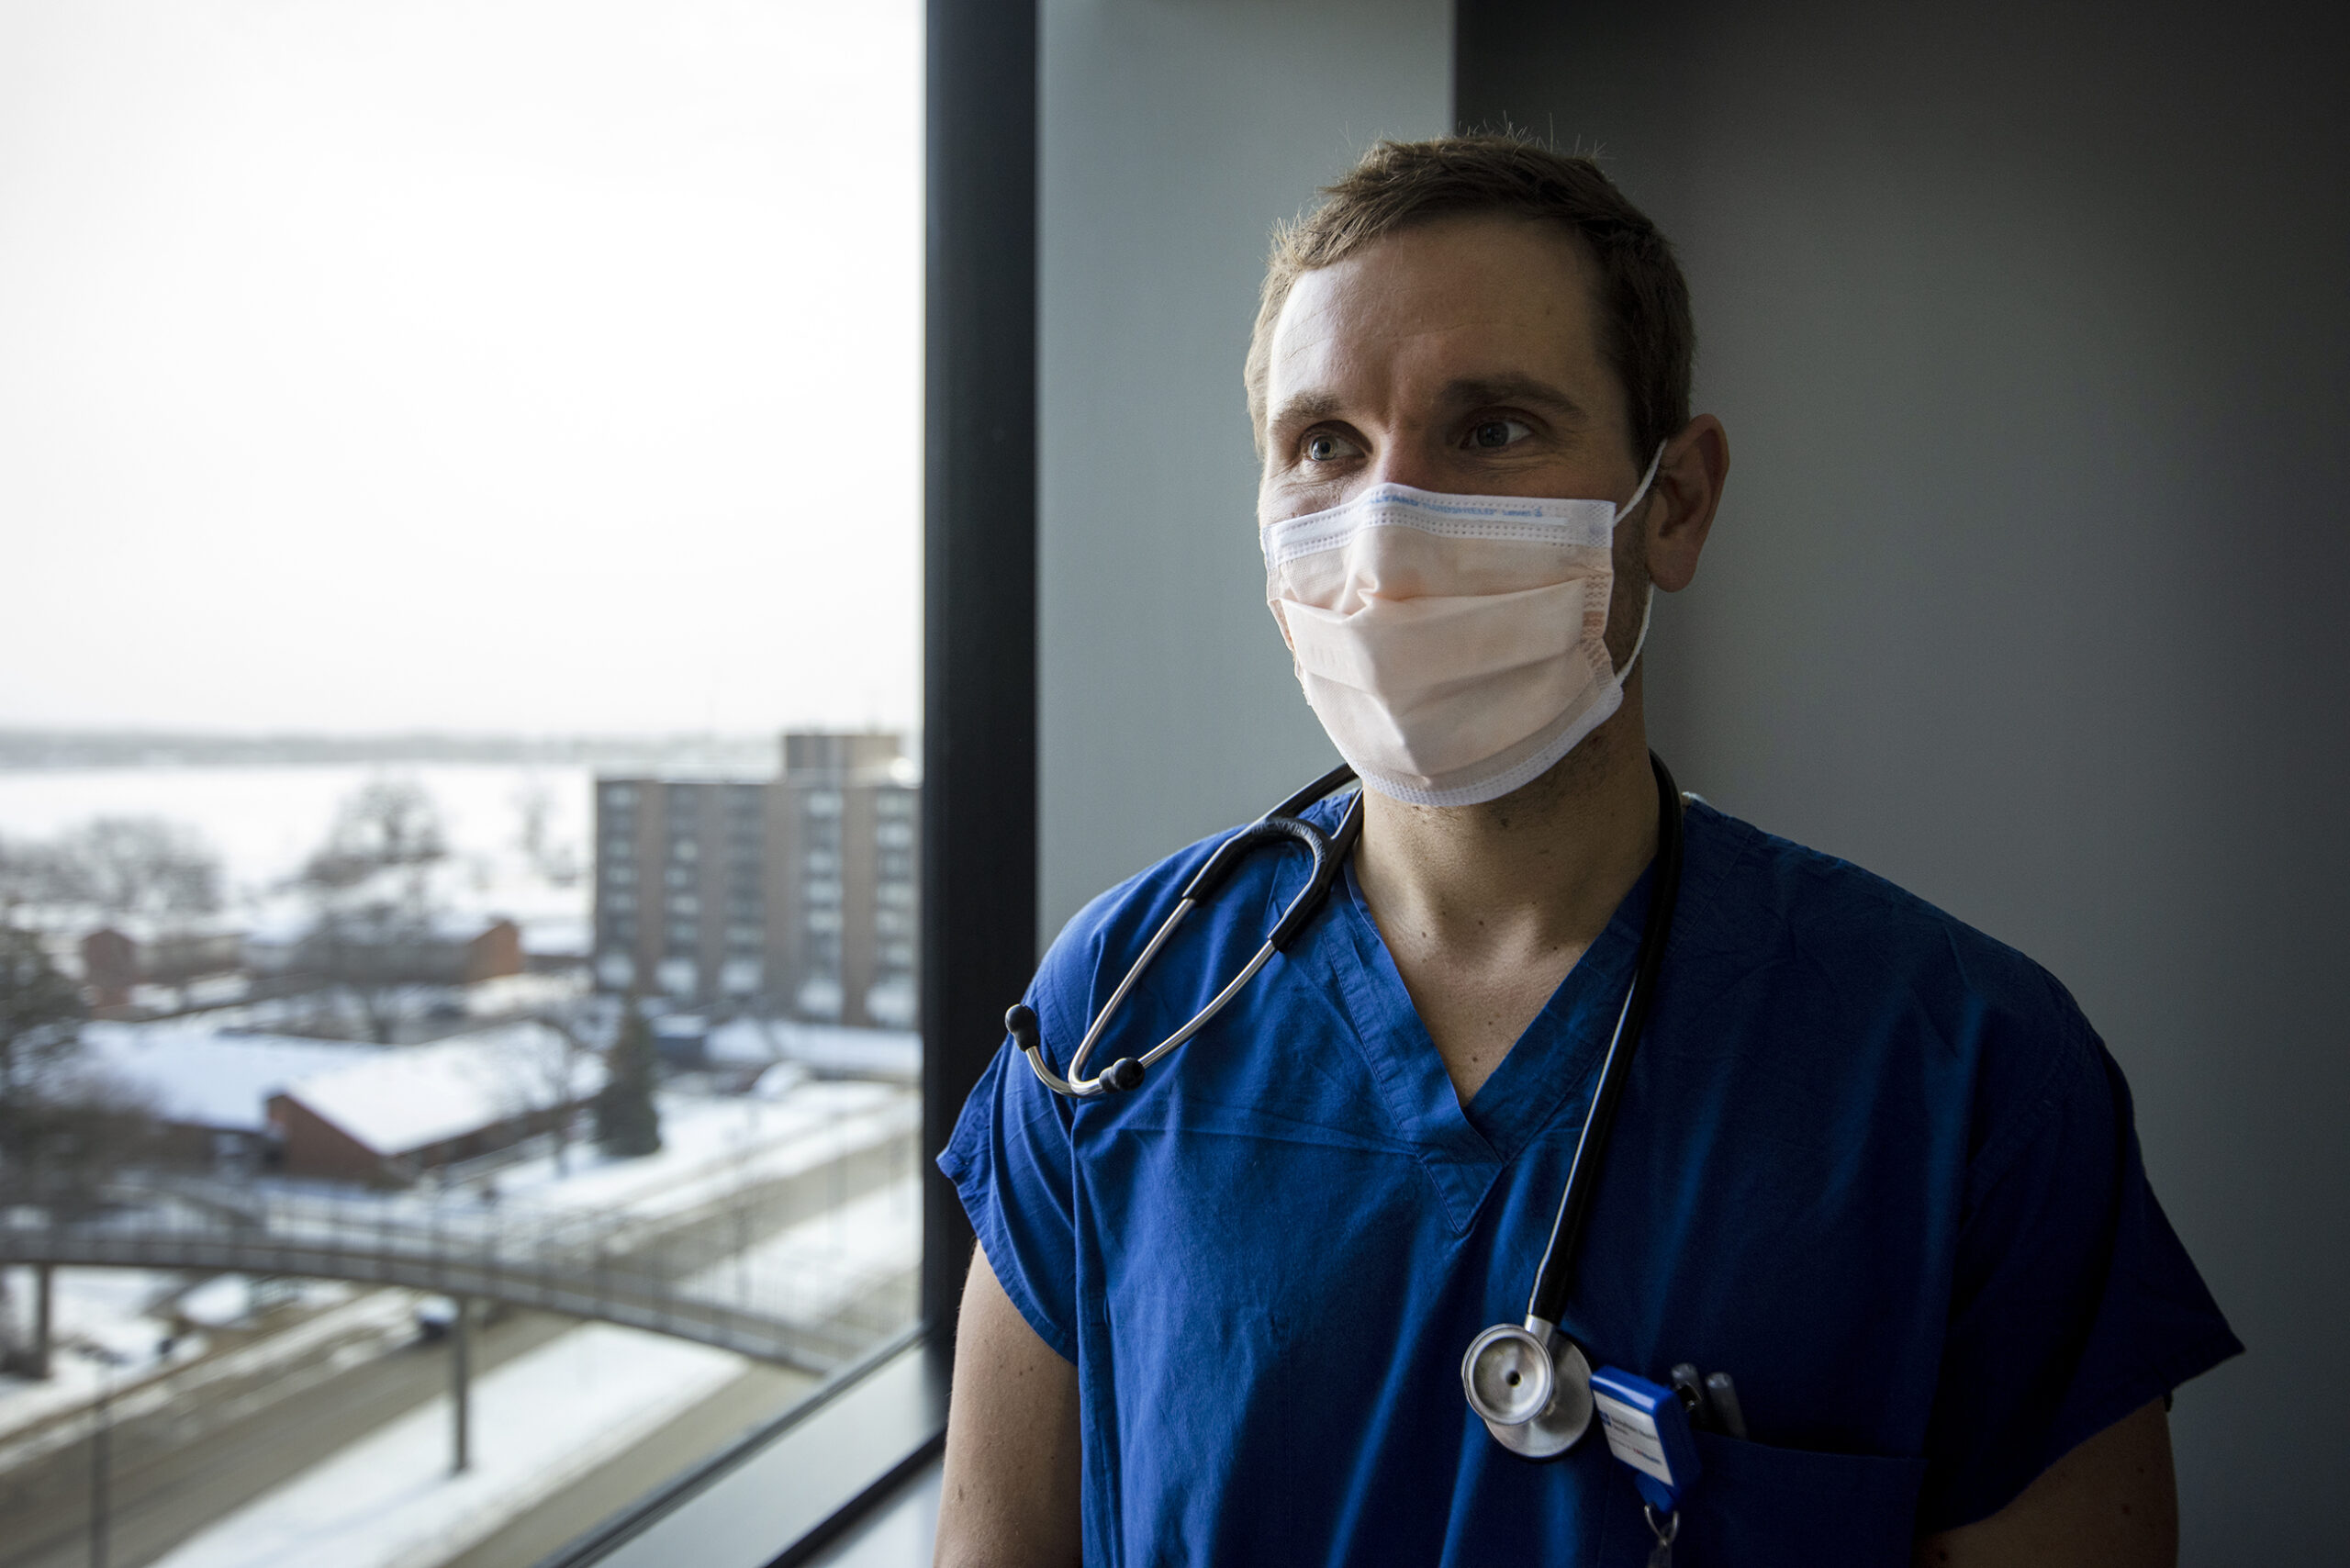 A doctor in blue scrubs and a face mask stands near a window.